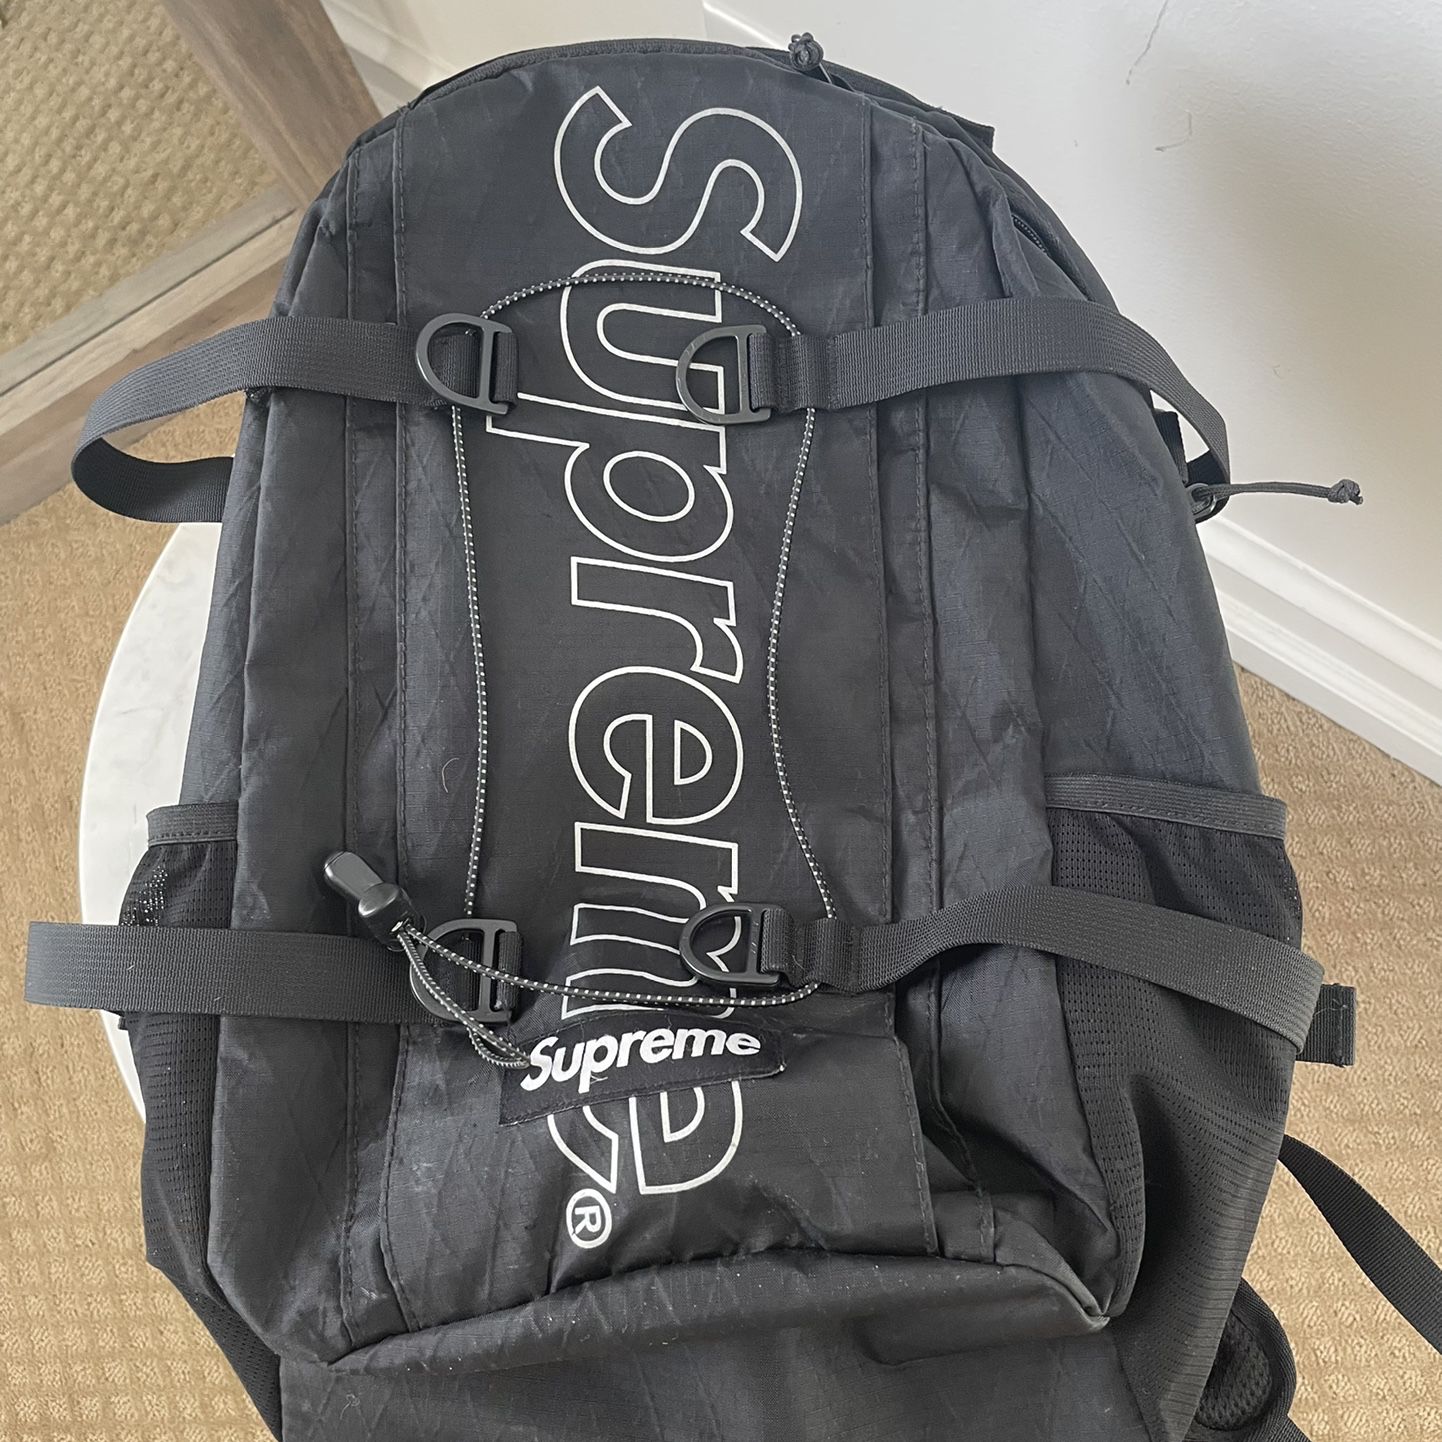 Supreme backpack for Sale in Dallas, TX - OfferUp